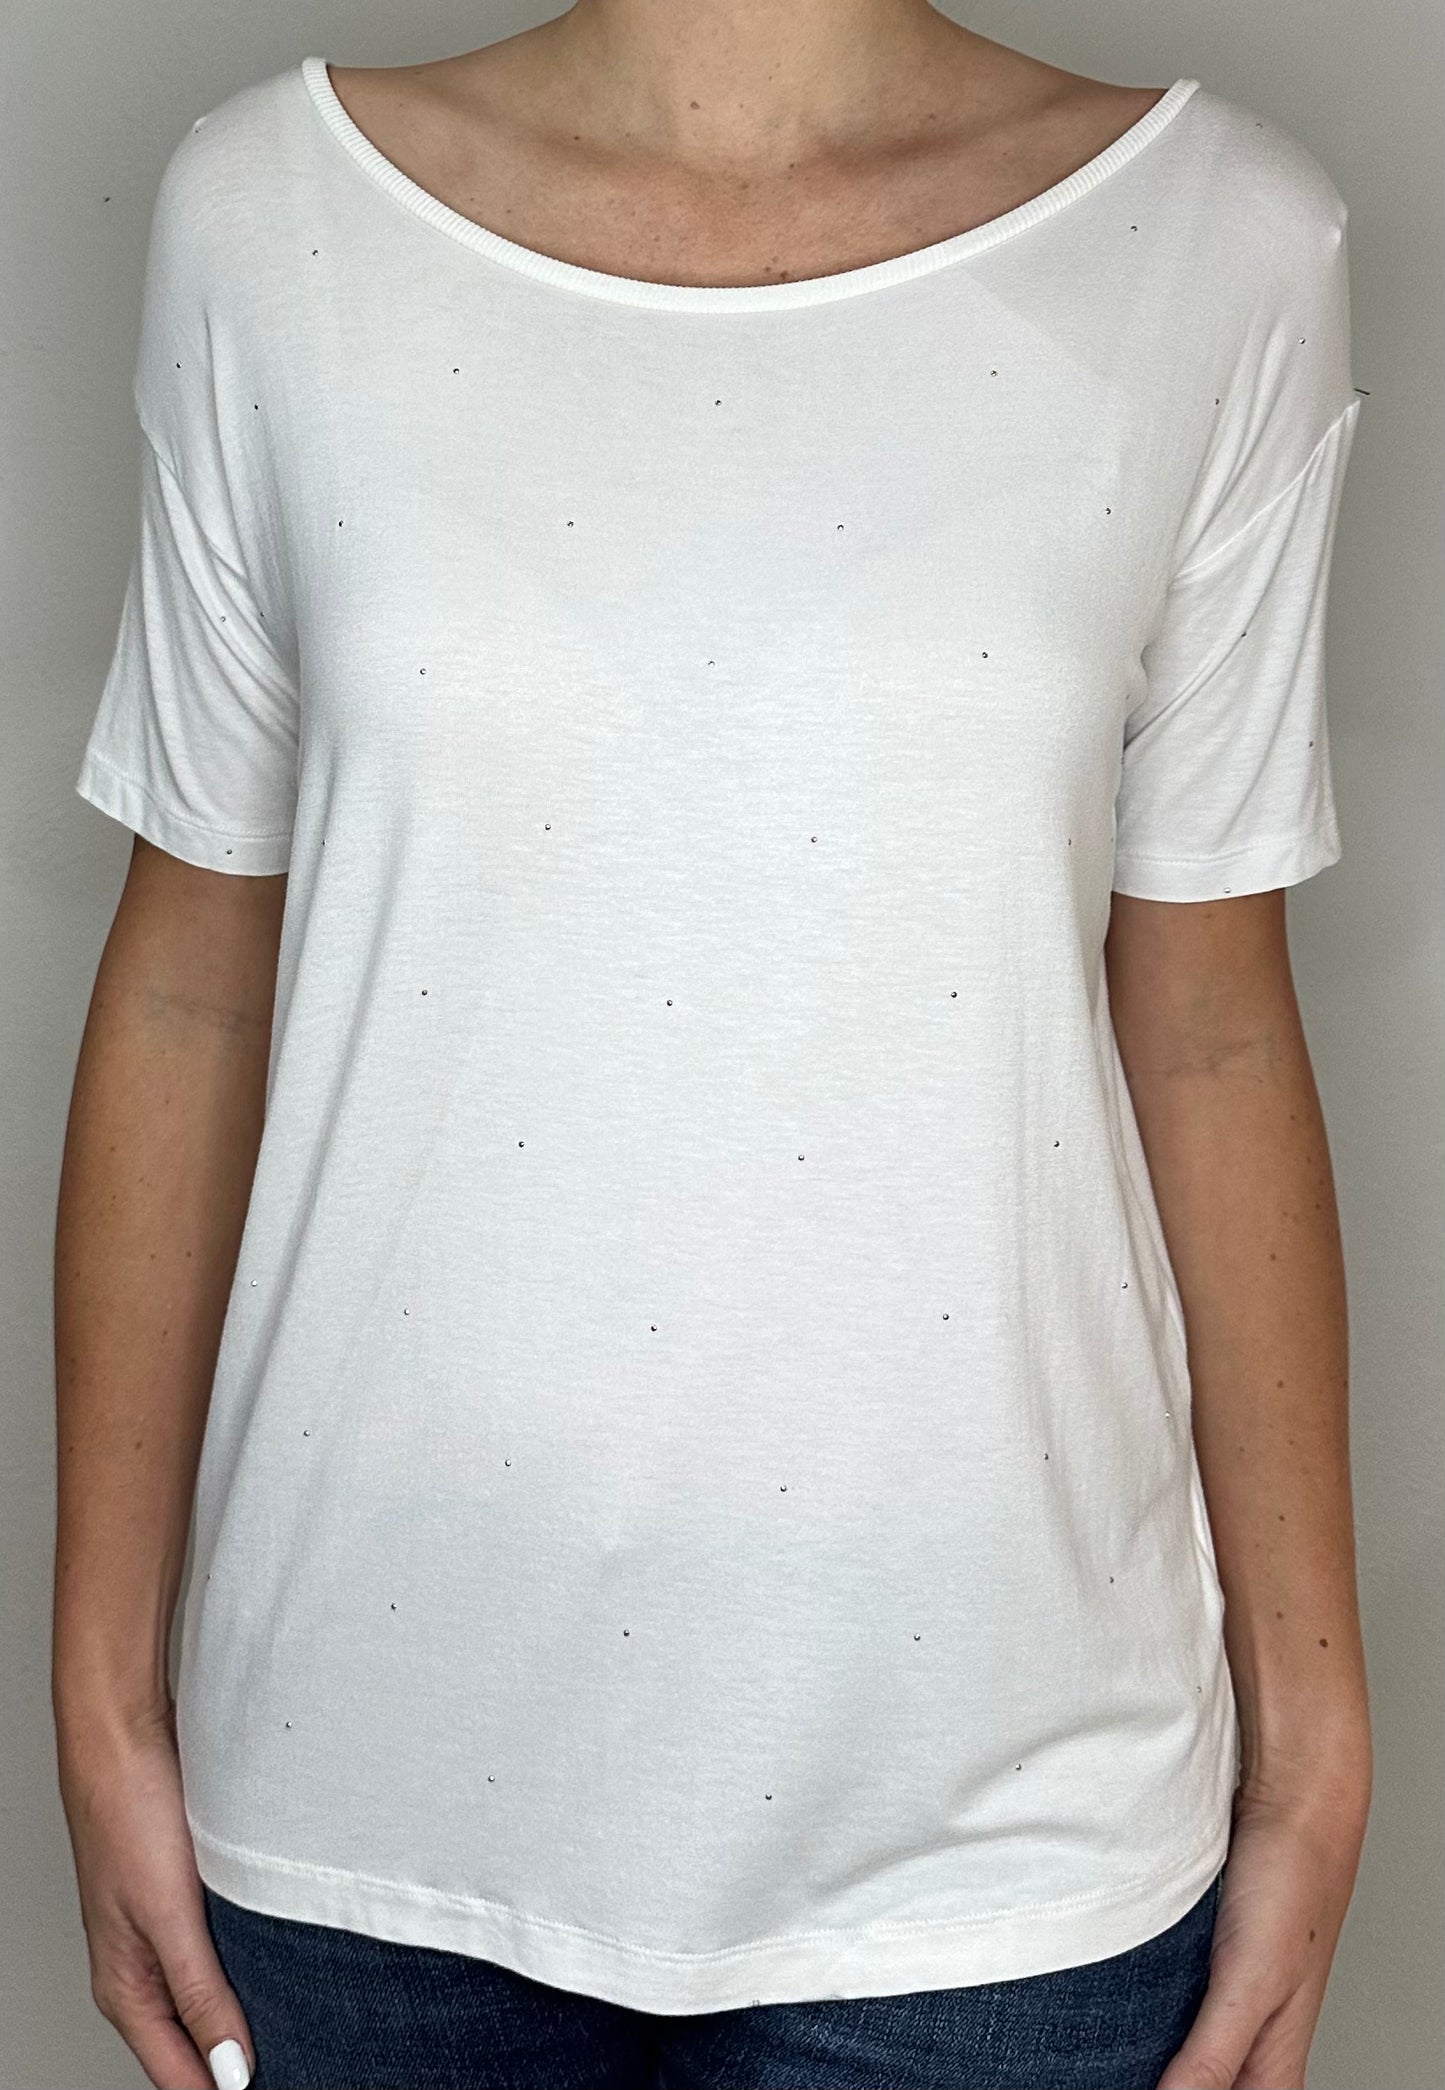 Next White T Shirt with Rose Gold Studs - Size 6P TS: 12